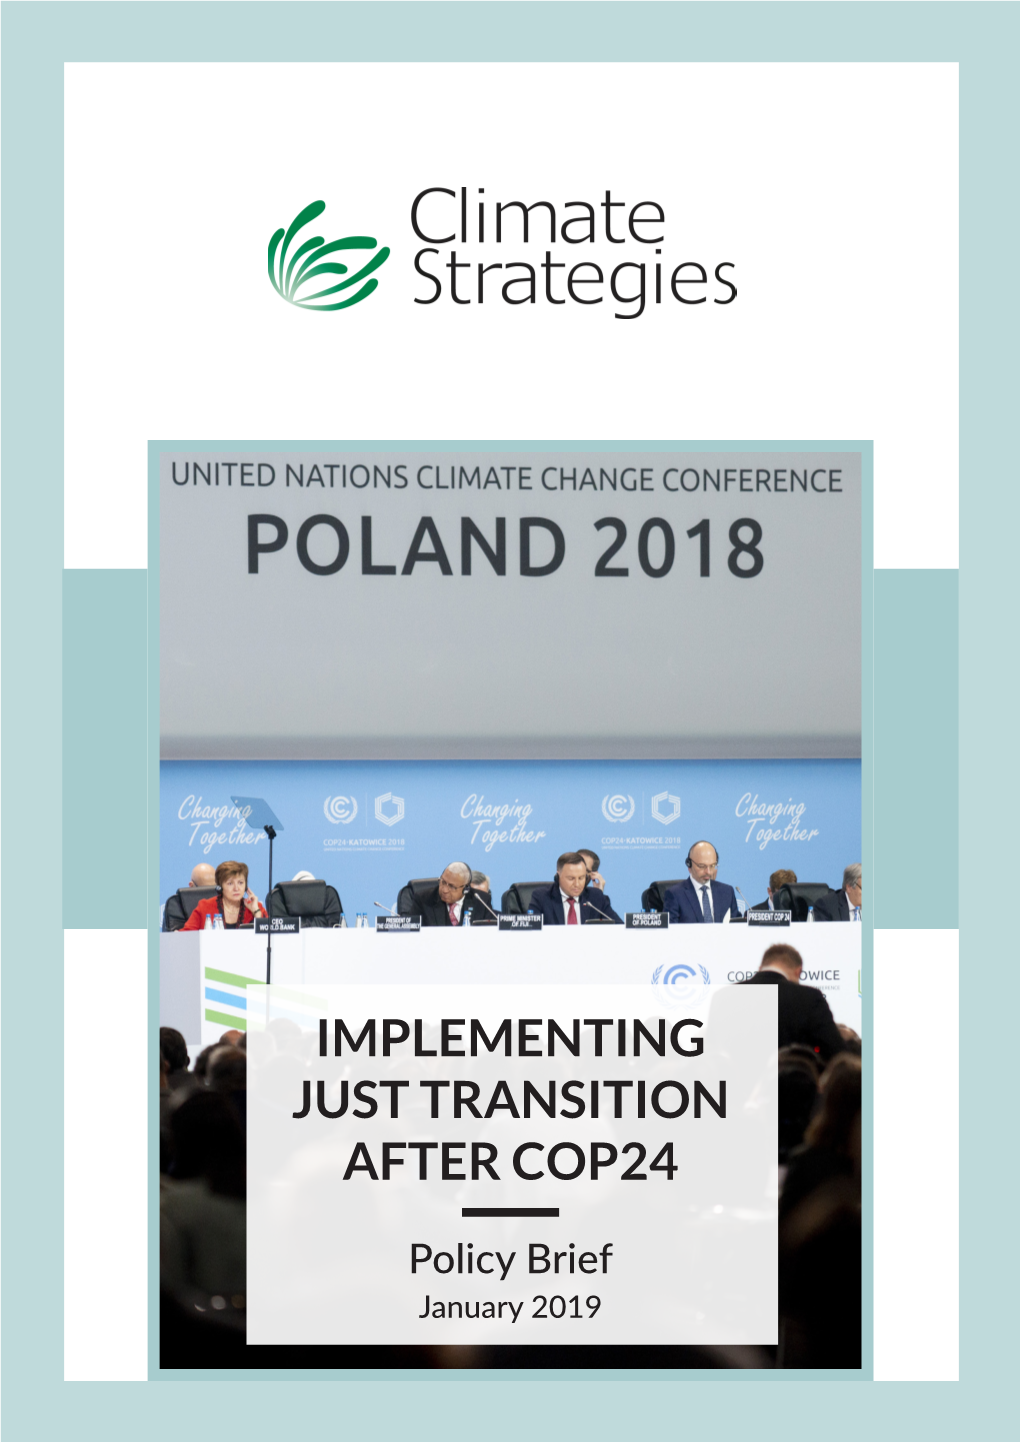 Implementing the Just Transition After COP24